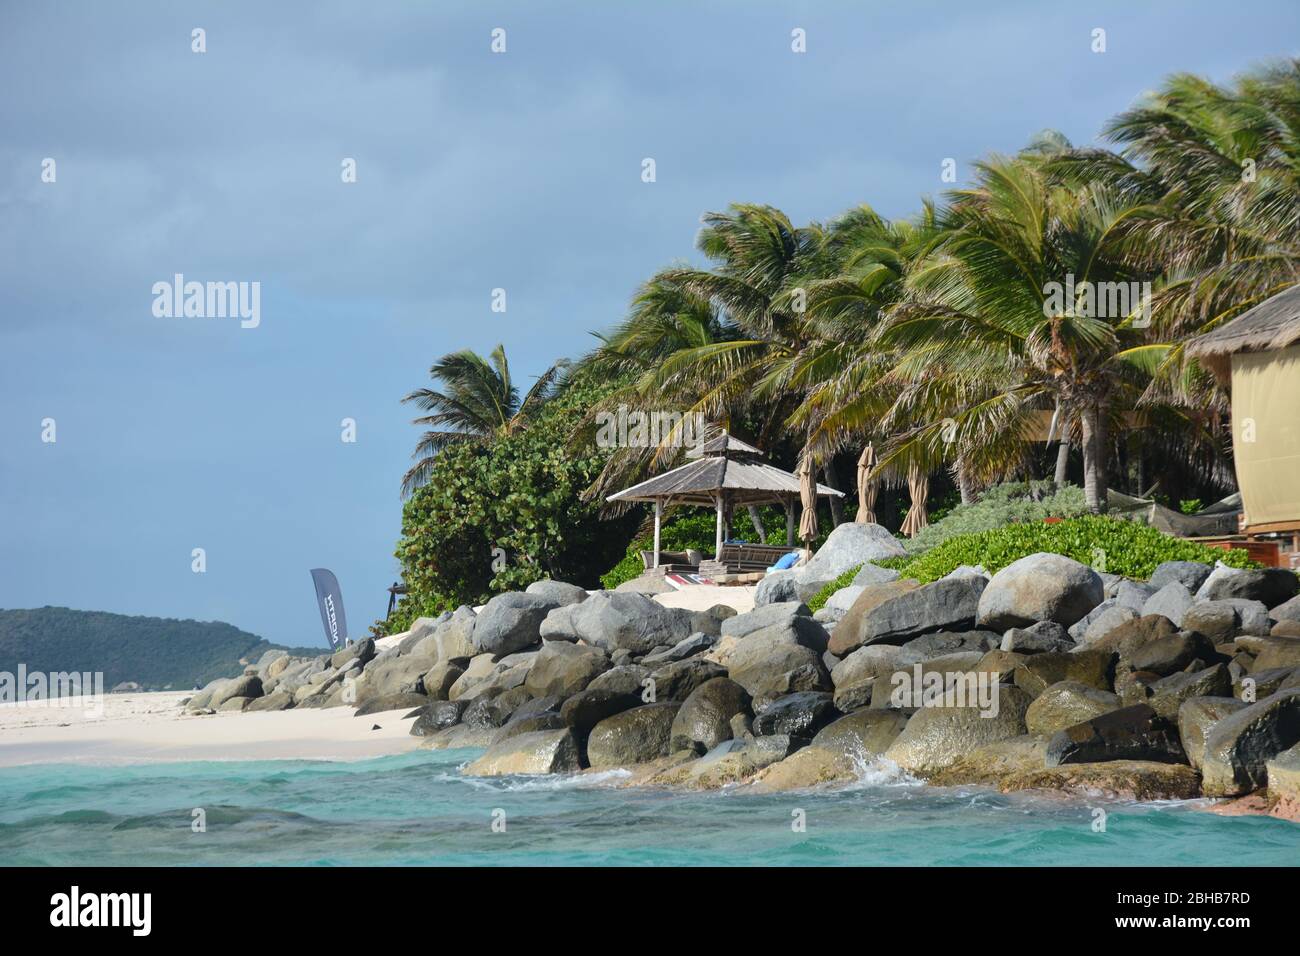 The beach at Necker Island, a private Caribbean island owned by Richard Branson under the Virgin Limited Edition brand. Stock Photo